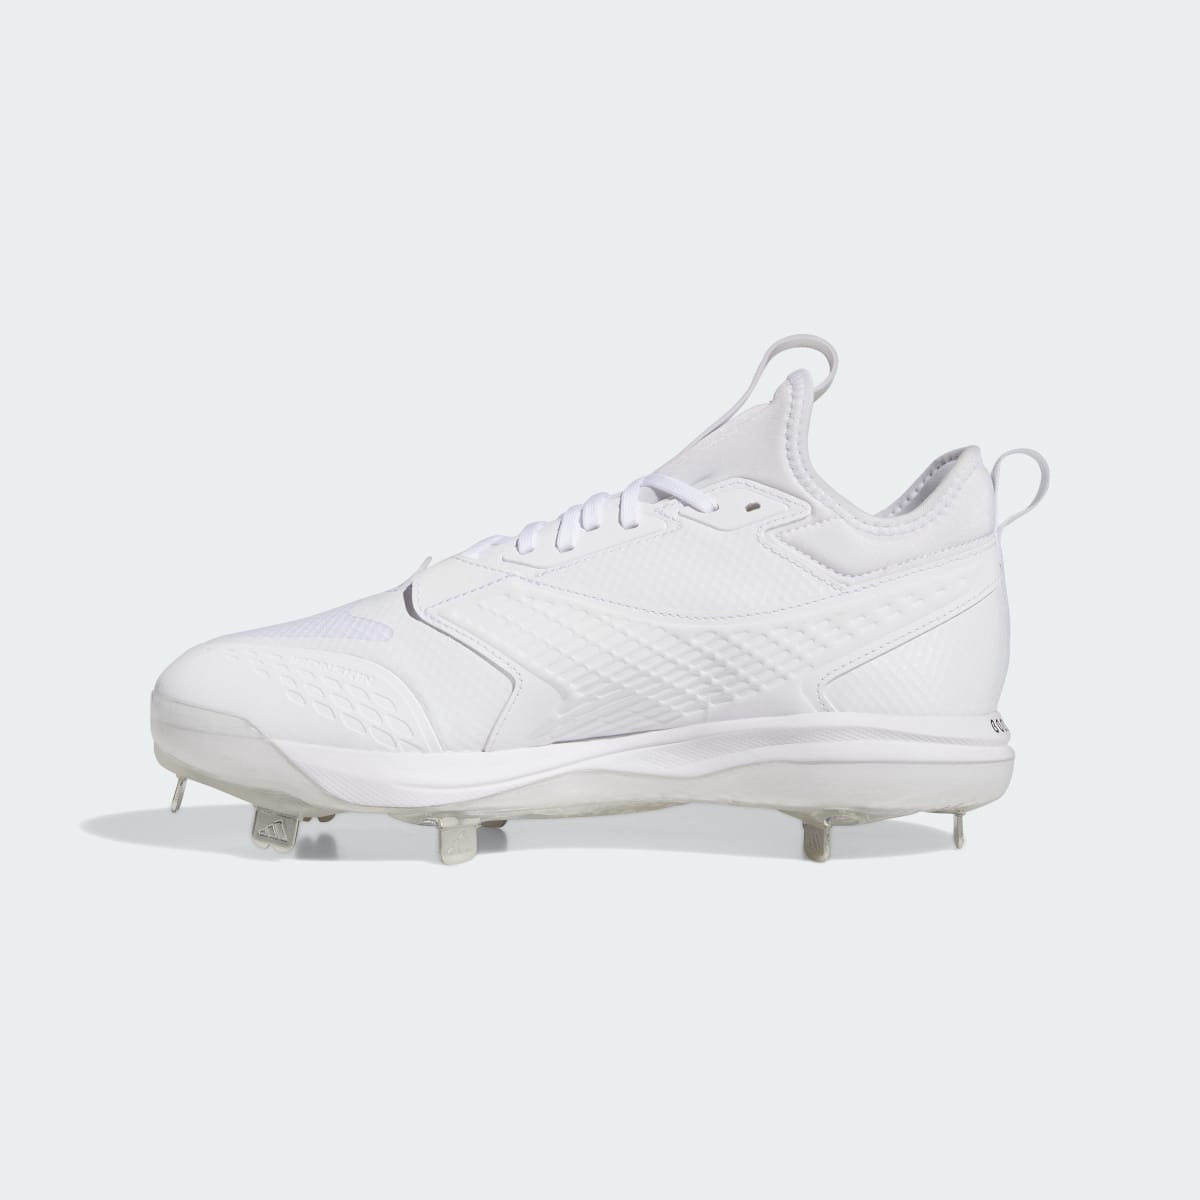 Adidas Icon 8 BOOST Cleats. 7